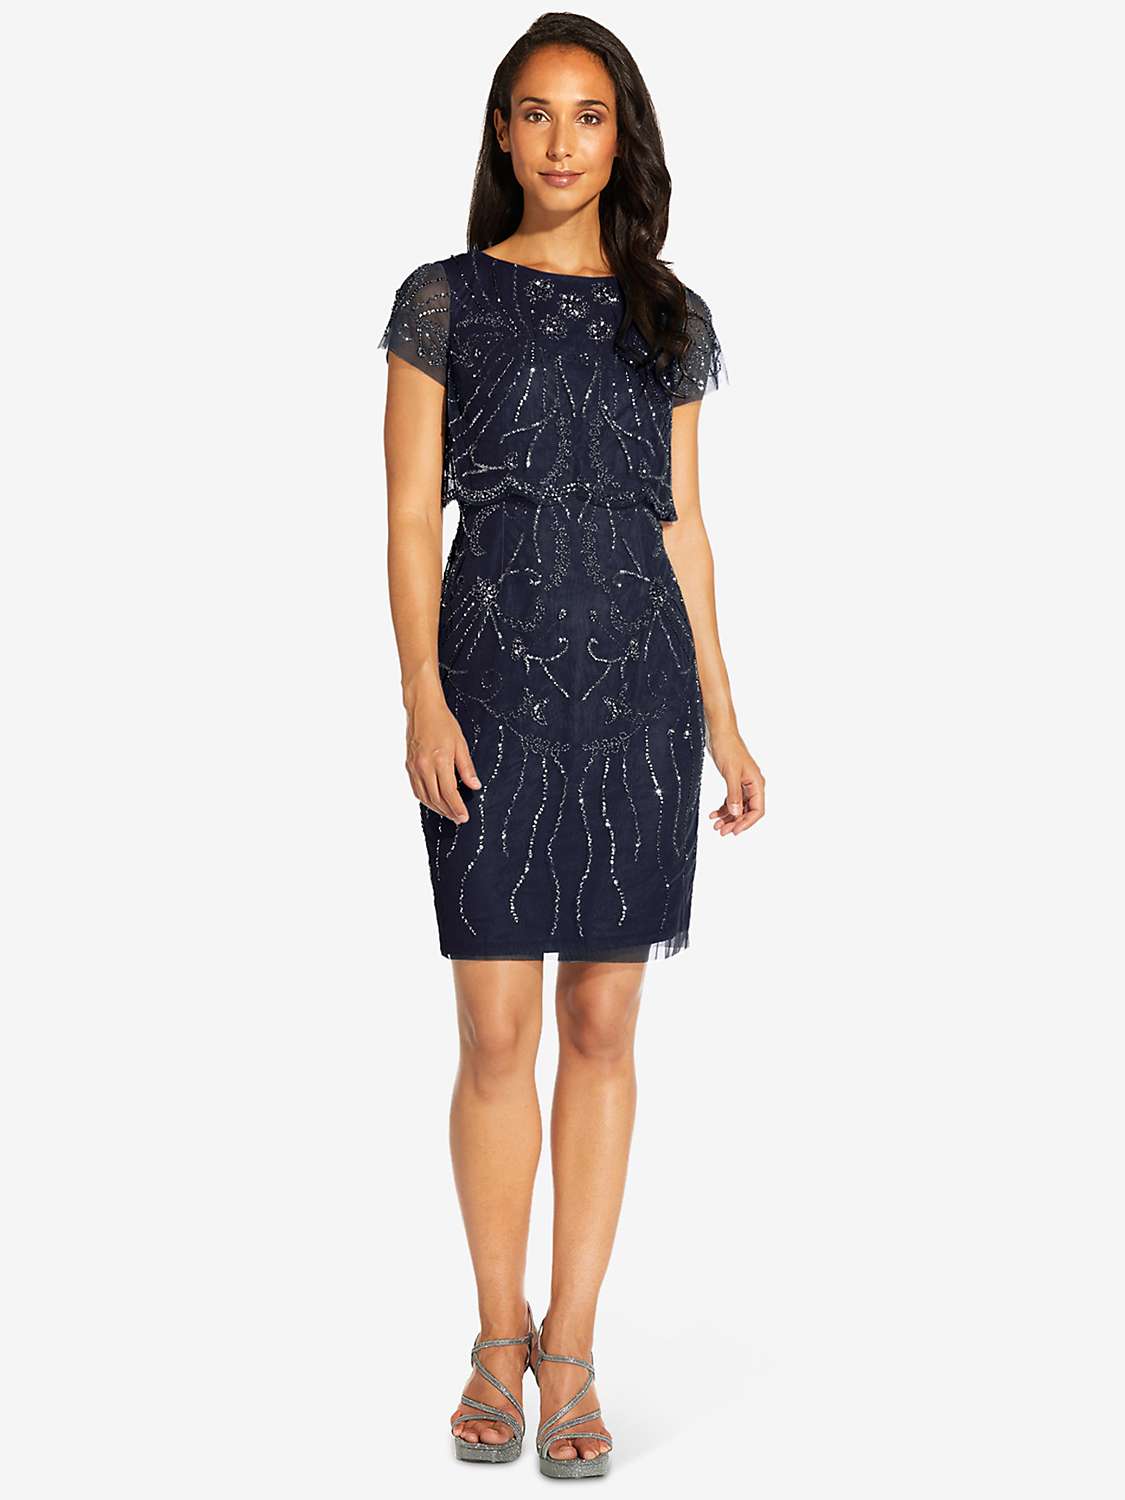 Buy Adrianna Papell Beaded Cocktail Dress, Midnight Online at johnlewis.com